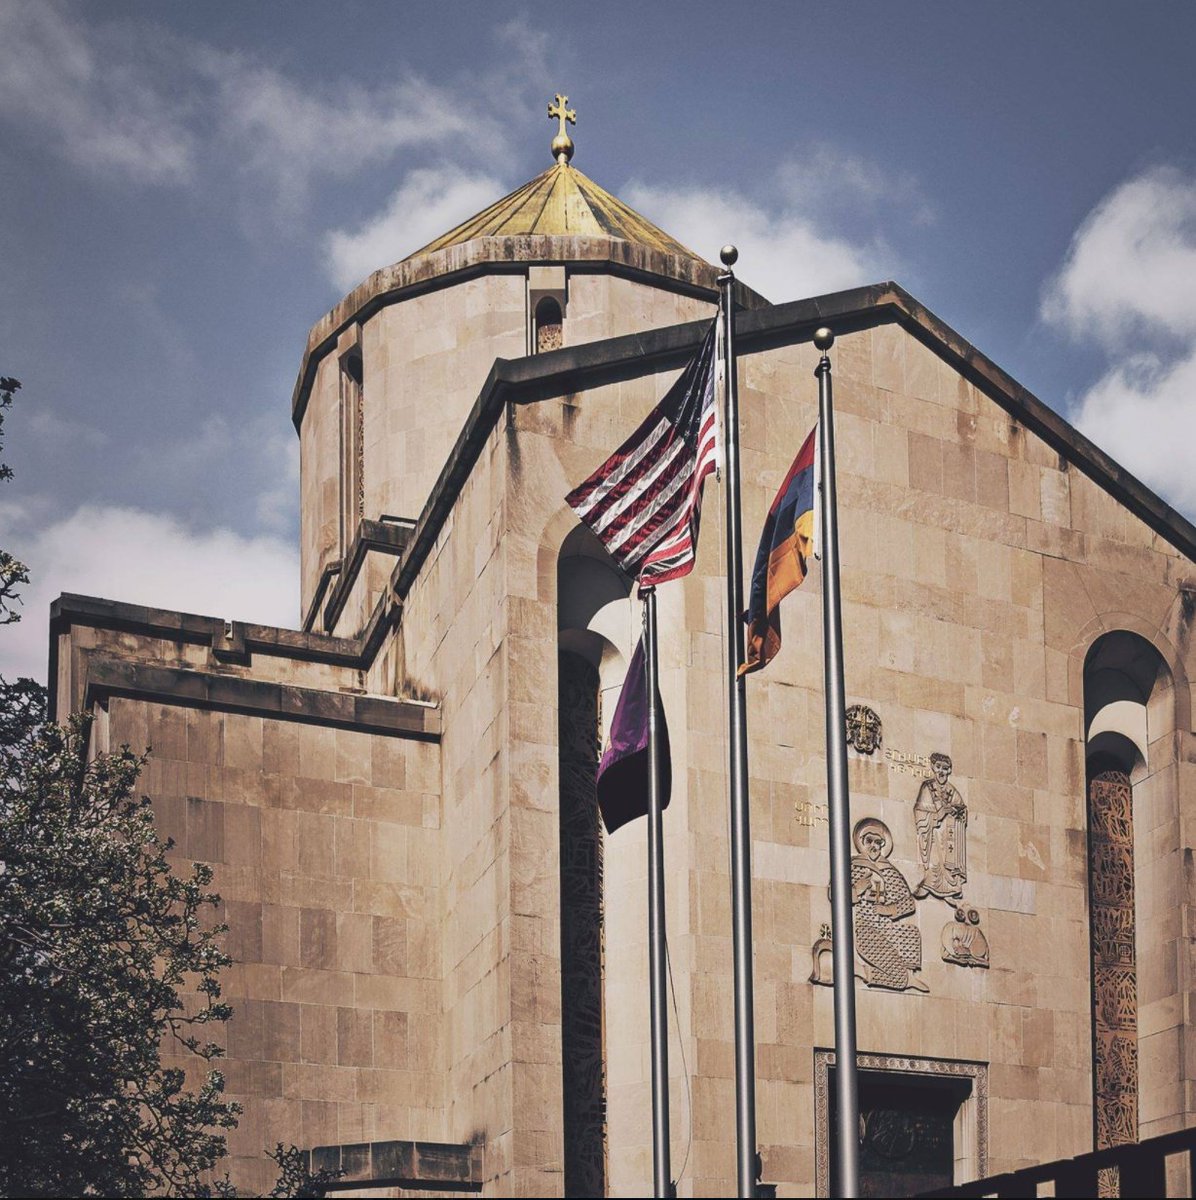 St. Vartan Armenian Cathedral in NYC, flying the ARMENIAN flag. Armenia currently occupies the Nagorno-Karabakh region of Azerbaijan, which has displaced 724,000 Azerbaijanis. Has this church's grounds ever been spray-painted with "Free Nagorno-Karabakh"? No. 2/